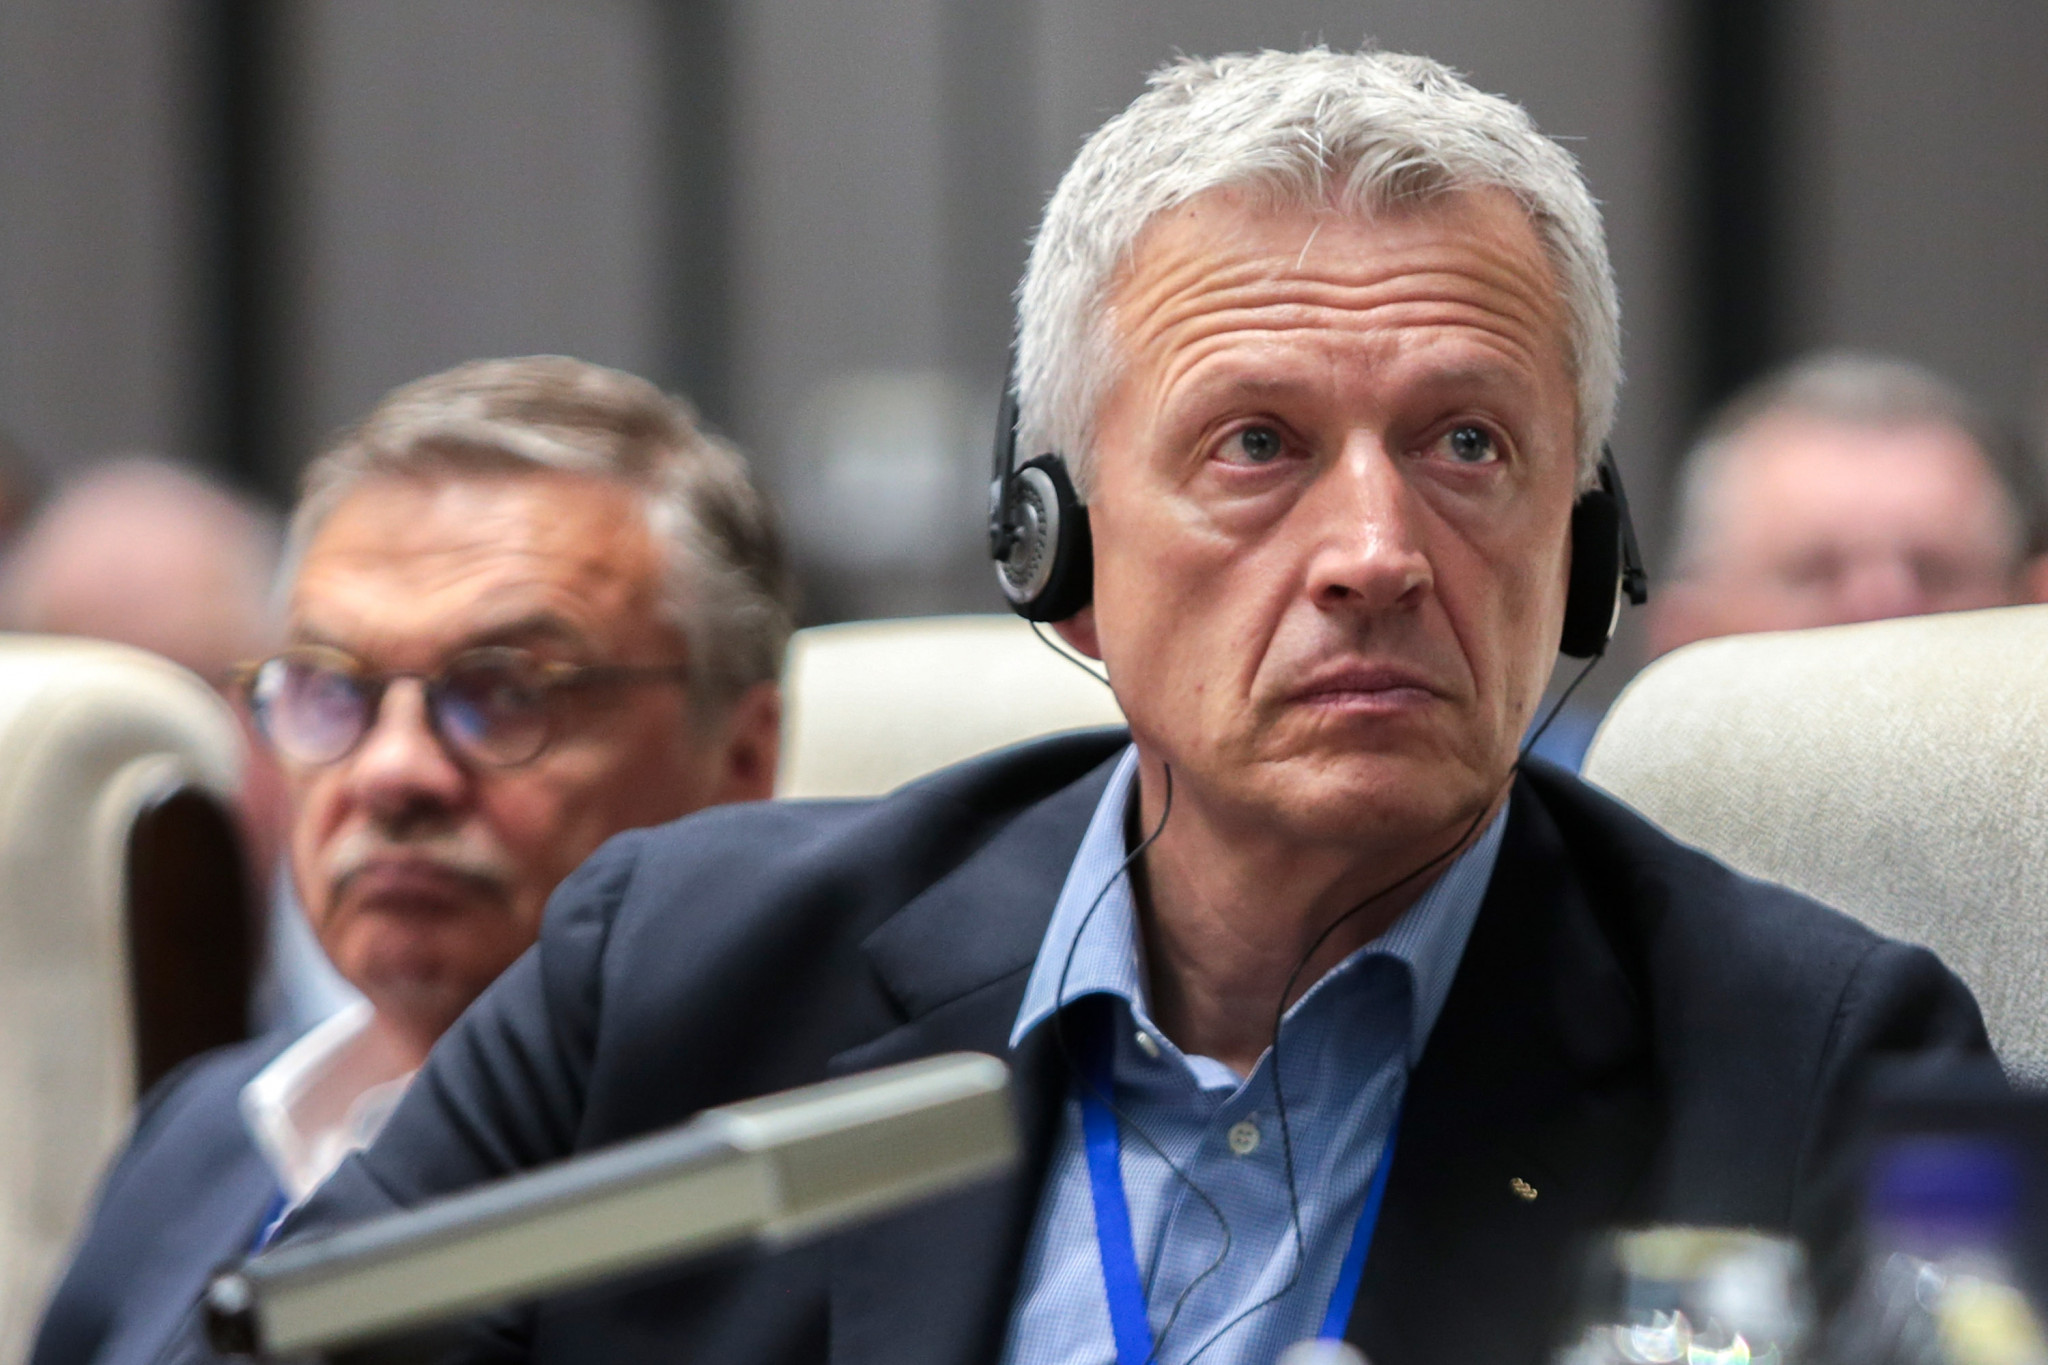 Romanian IOC member Octavian Morariu chairs the Future Winter Host Commission ©Getty Images